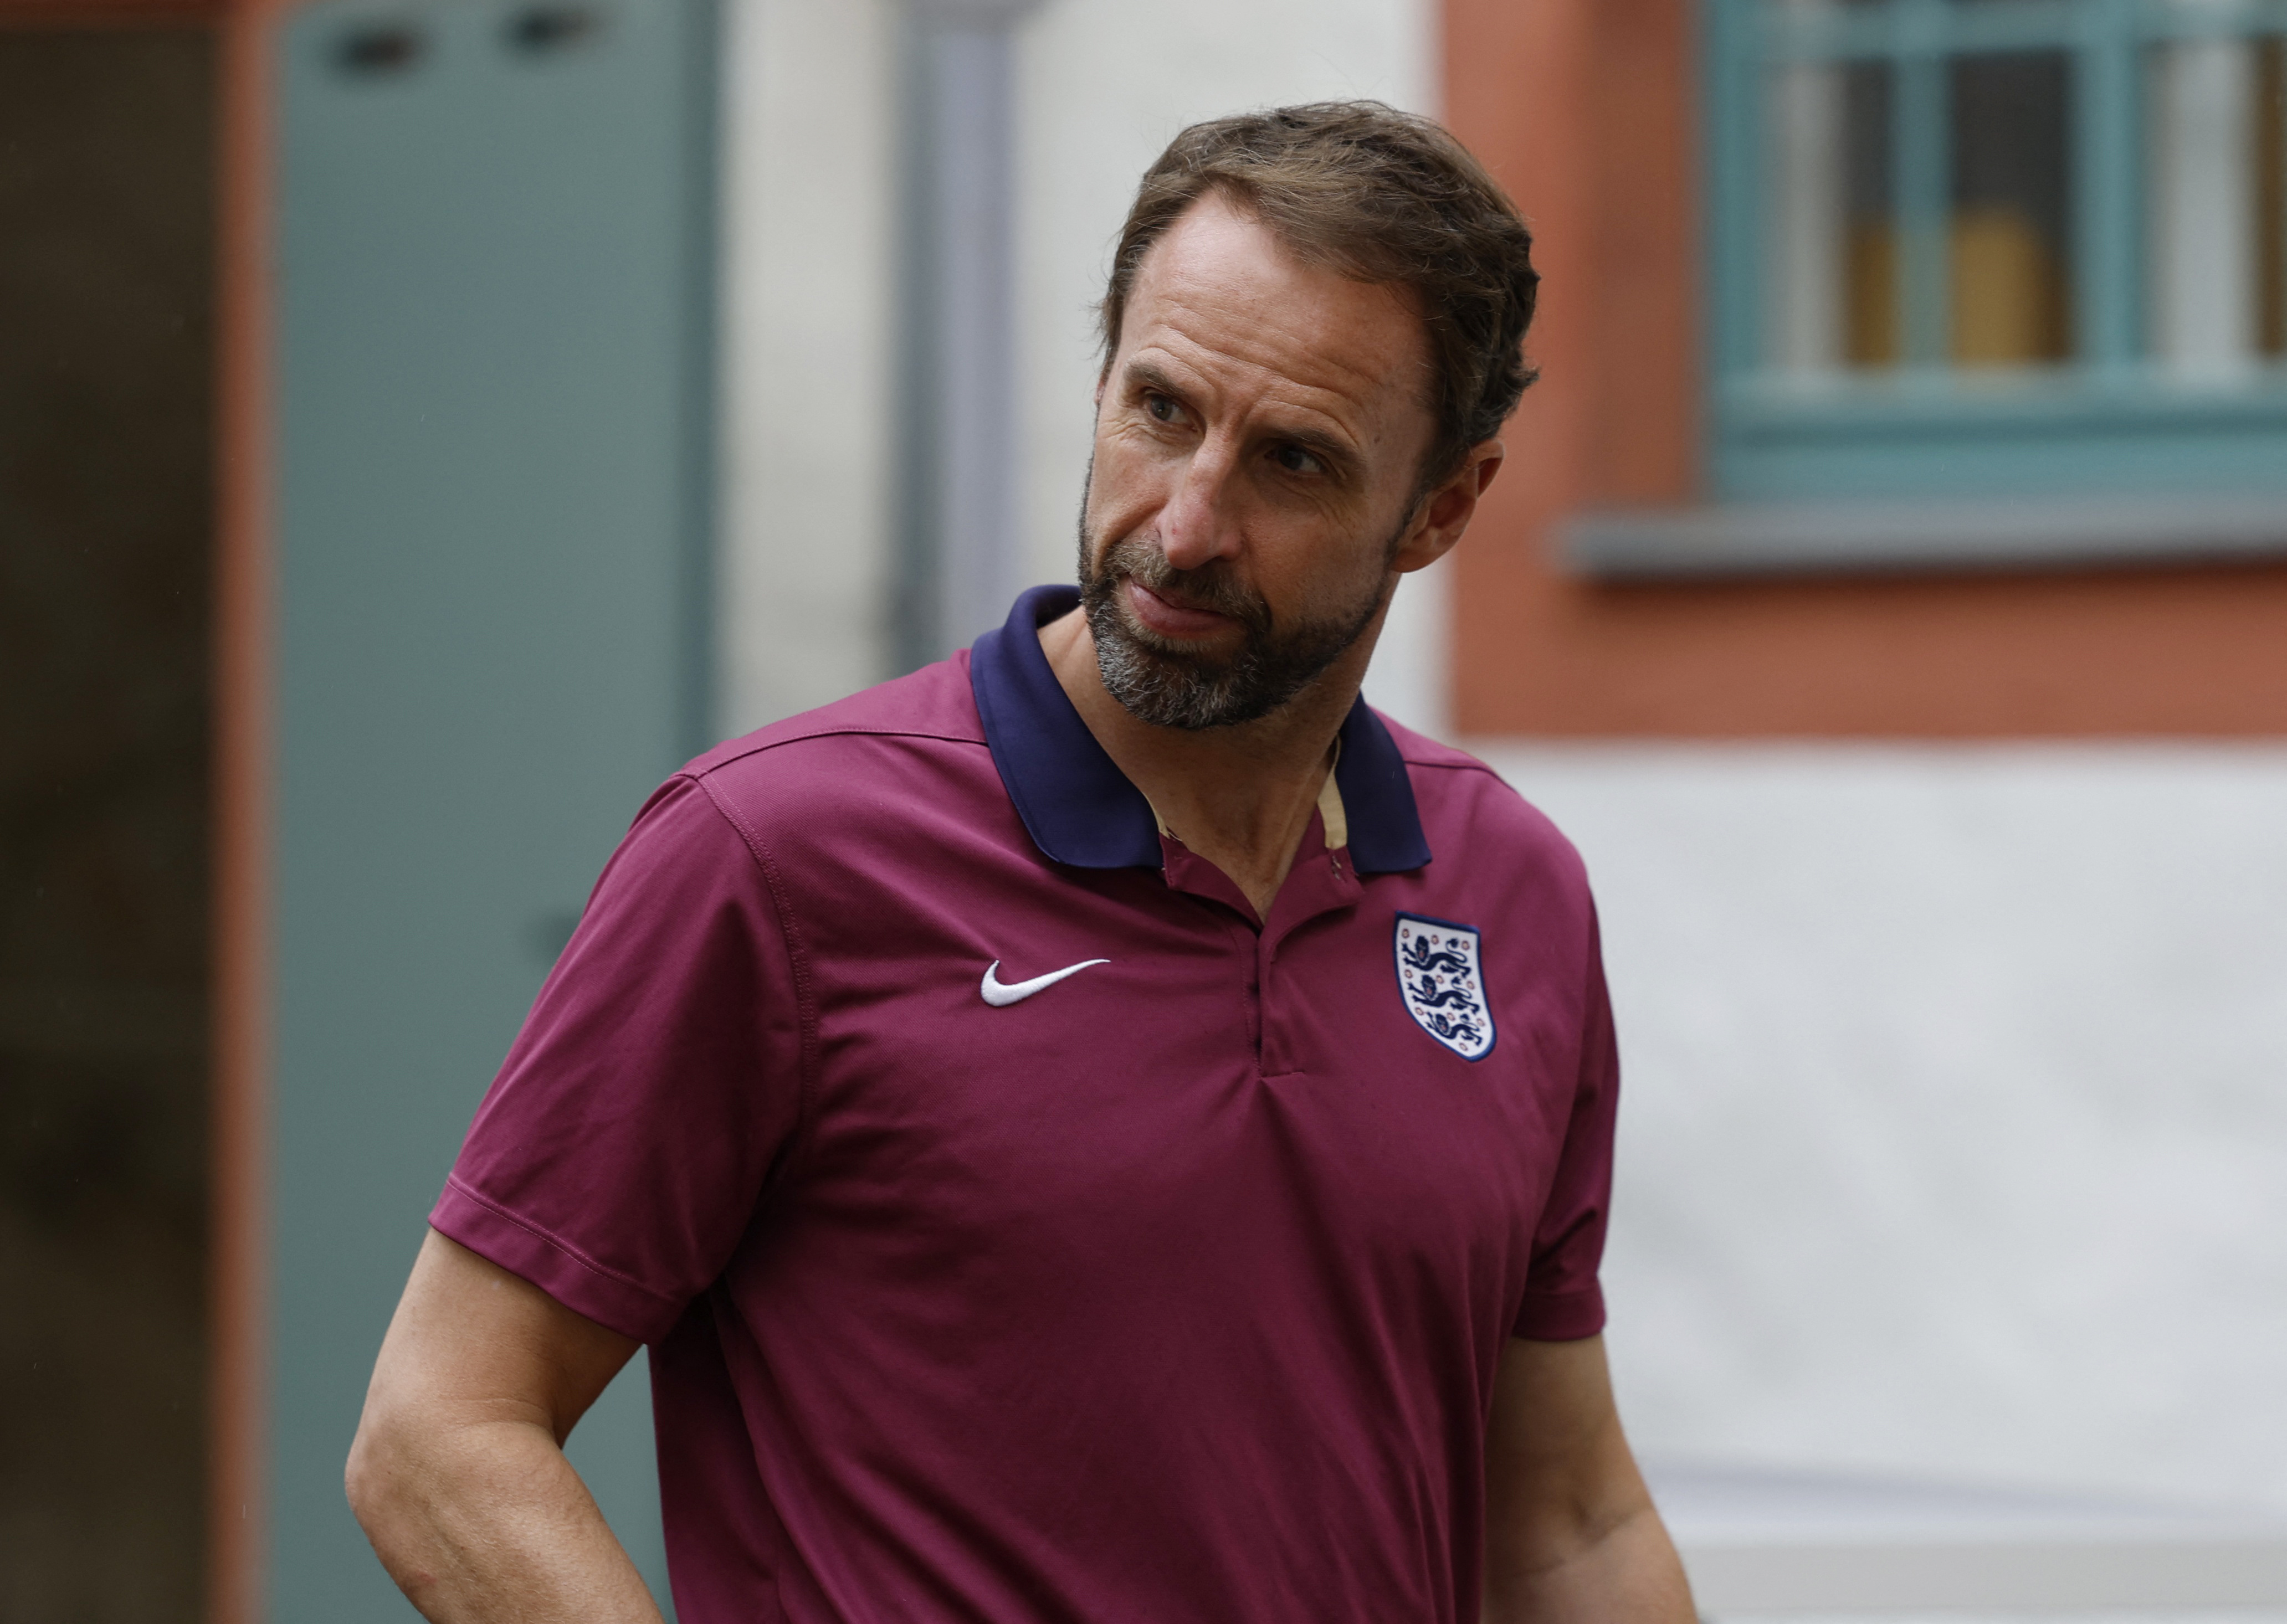 Southgate has hinted at changes by training with a new formation